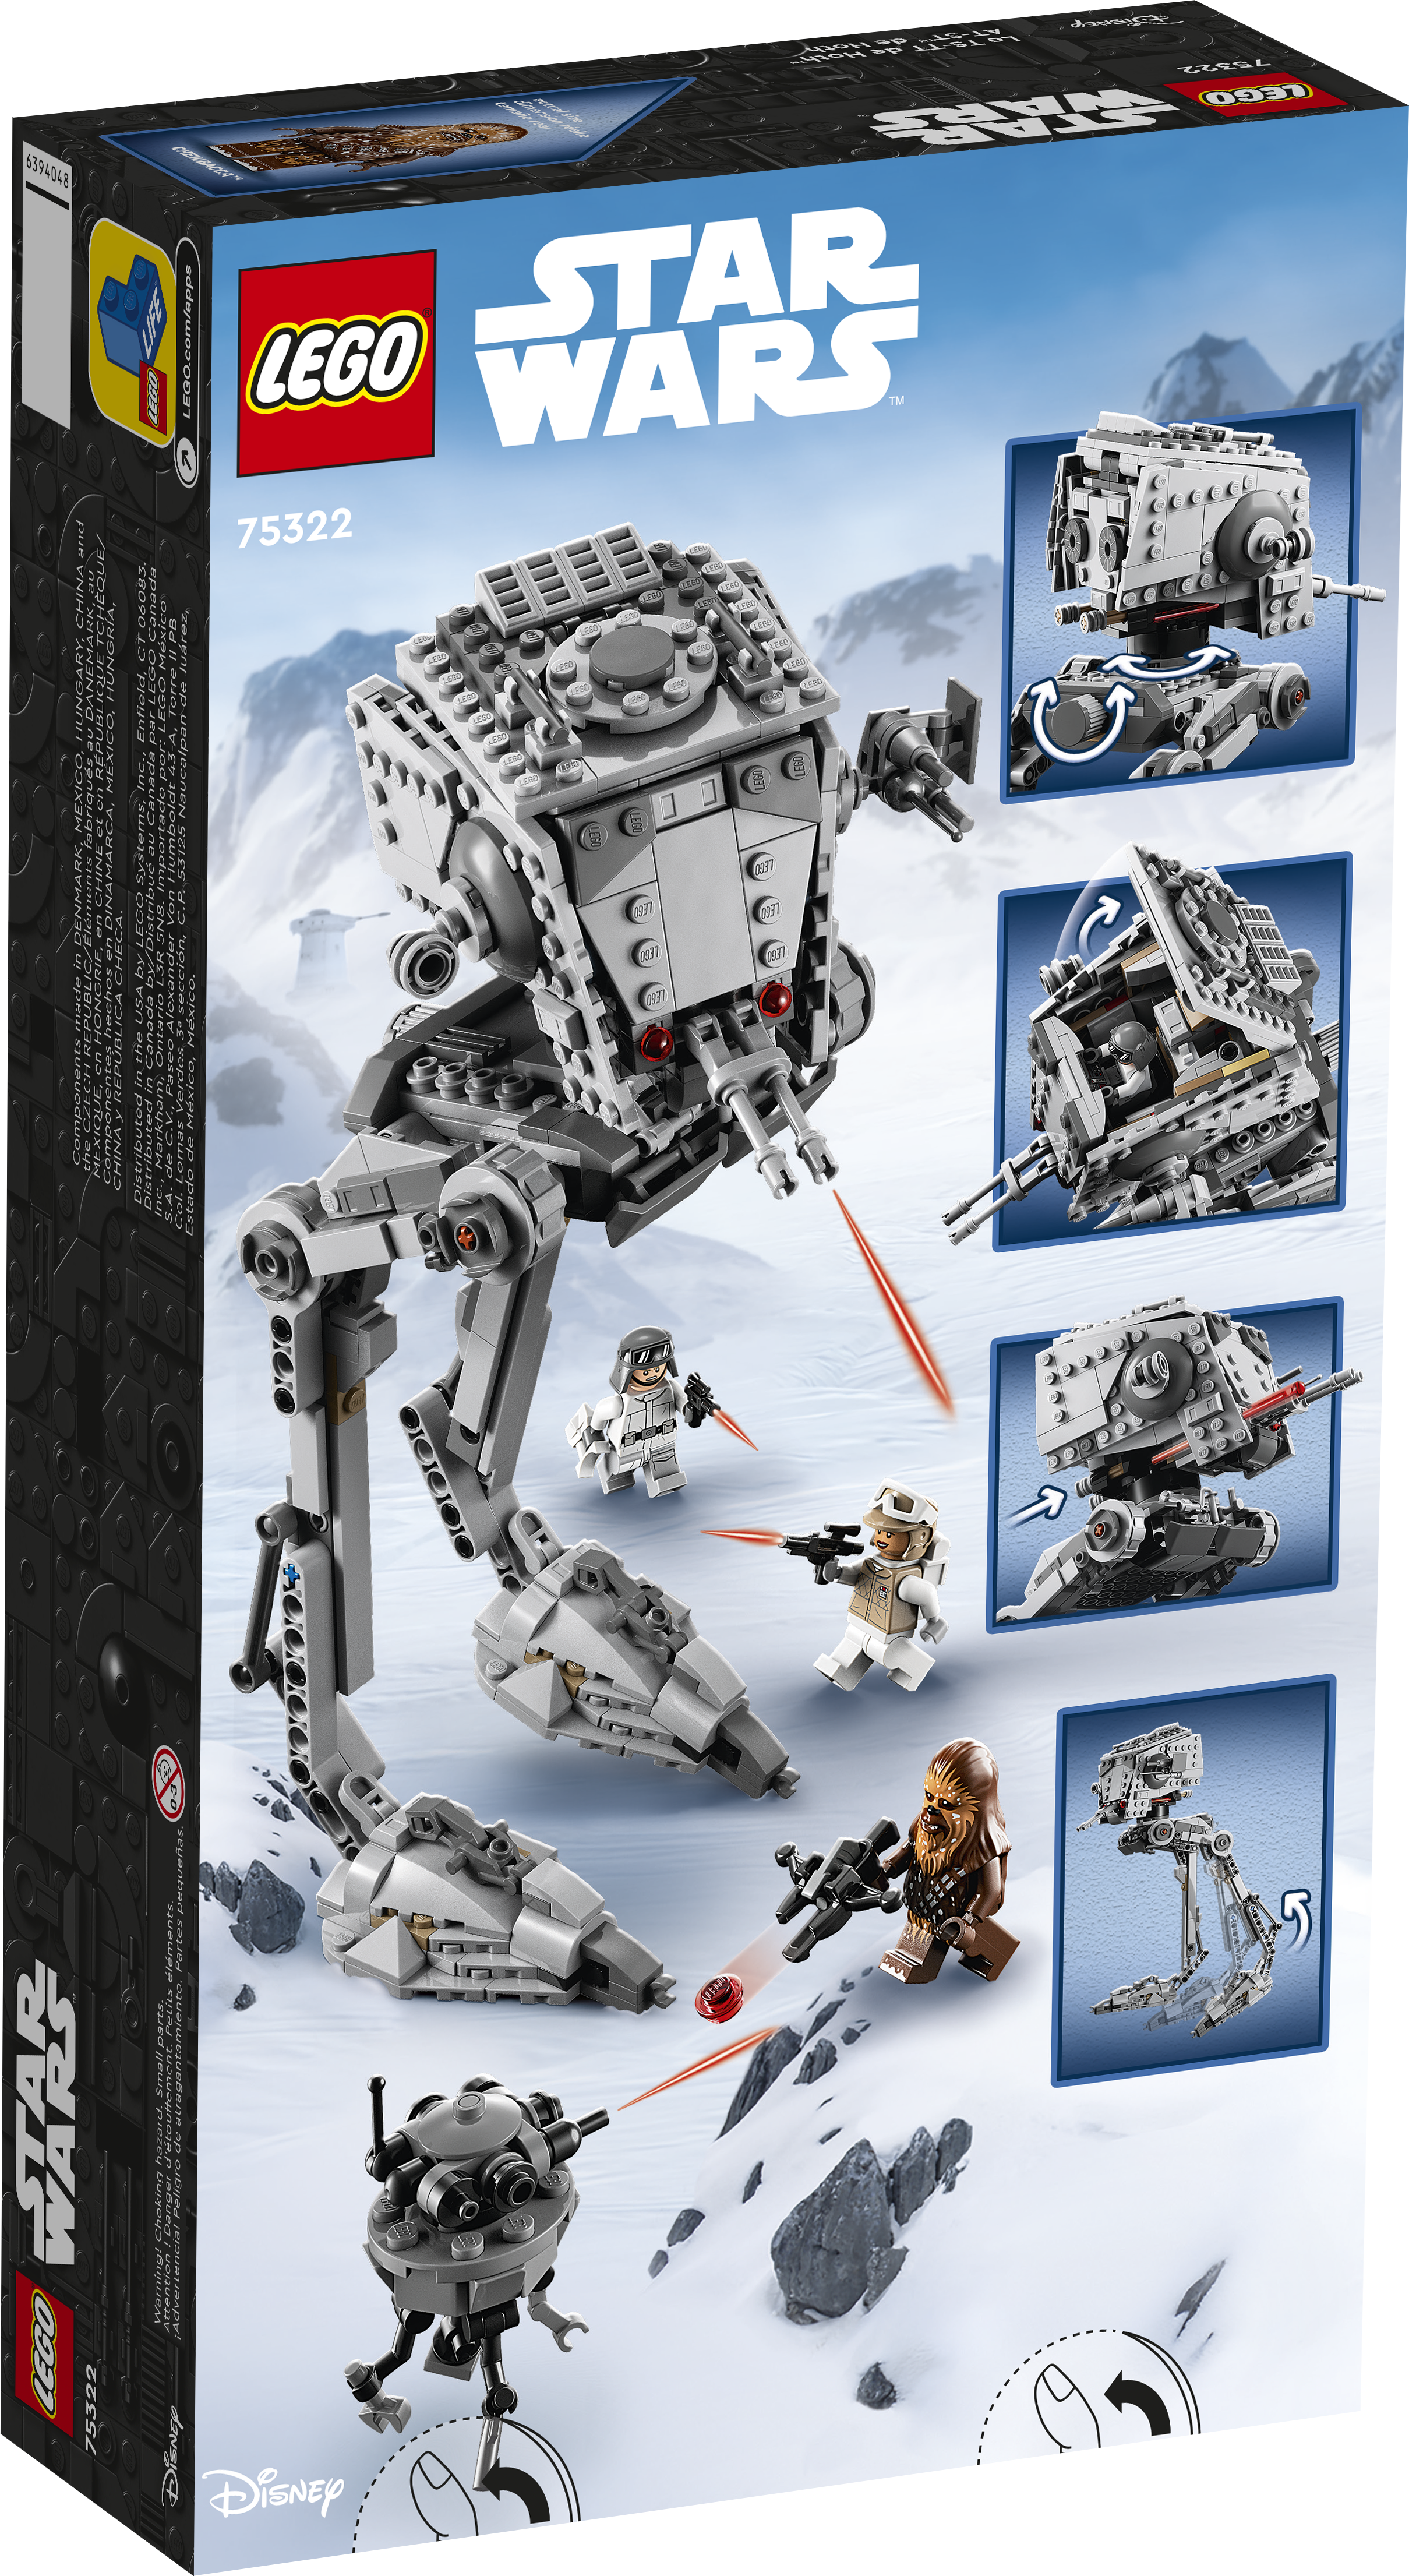 LEGO Star Wars Hoth AT-ST 75322 by LEGO Systems Inc.